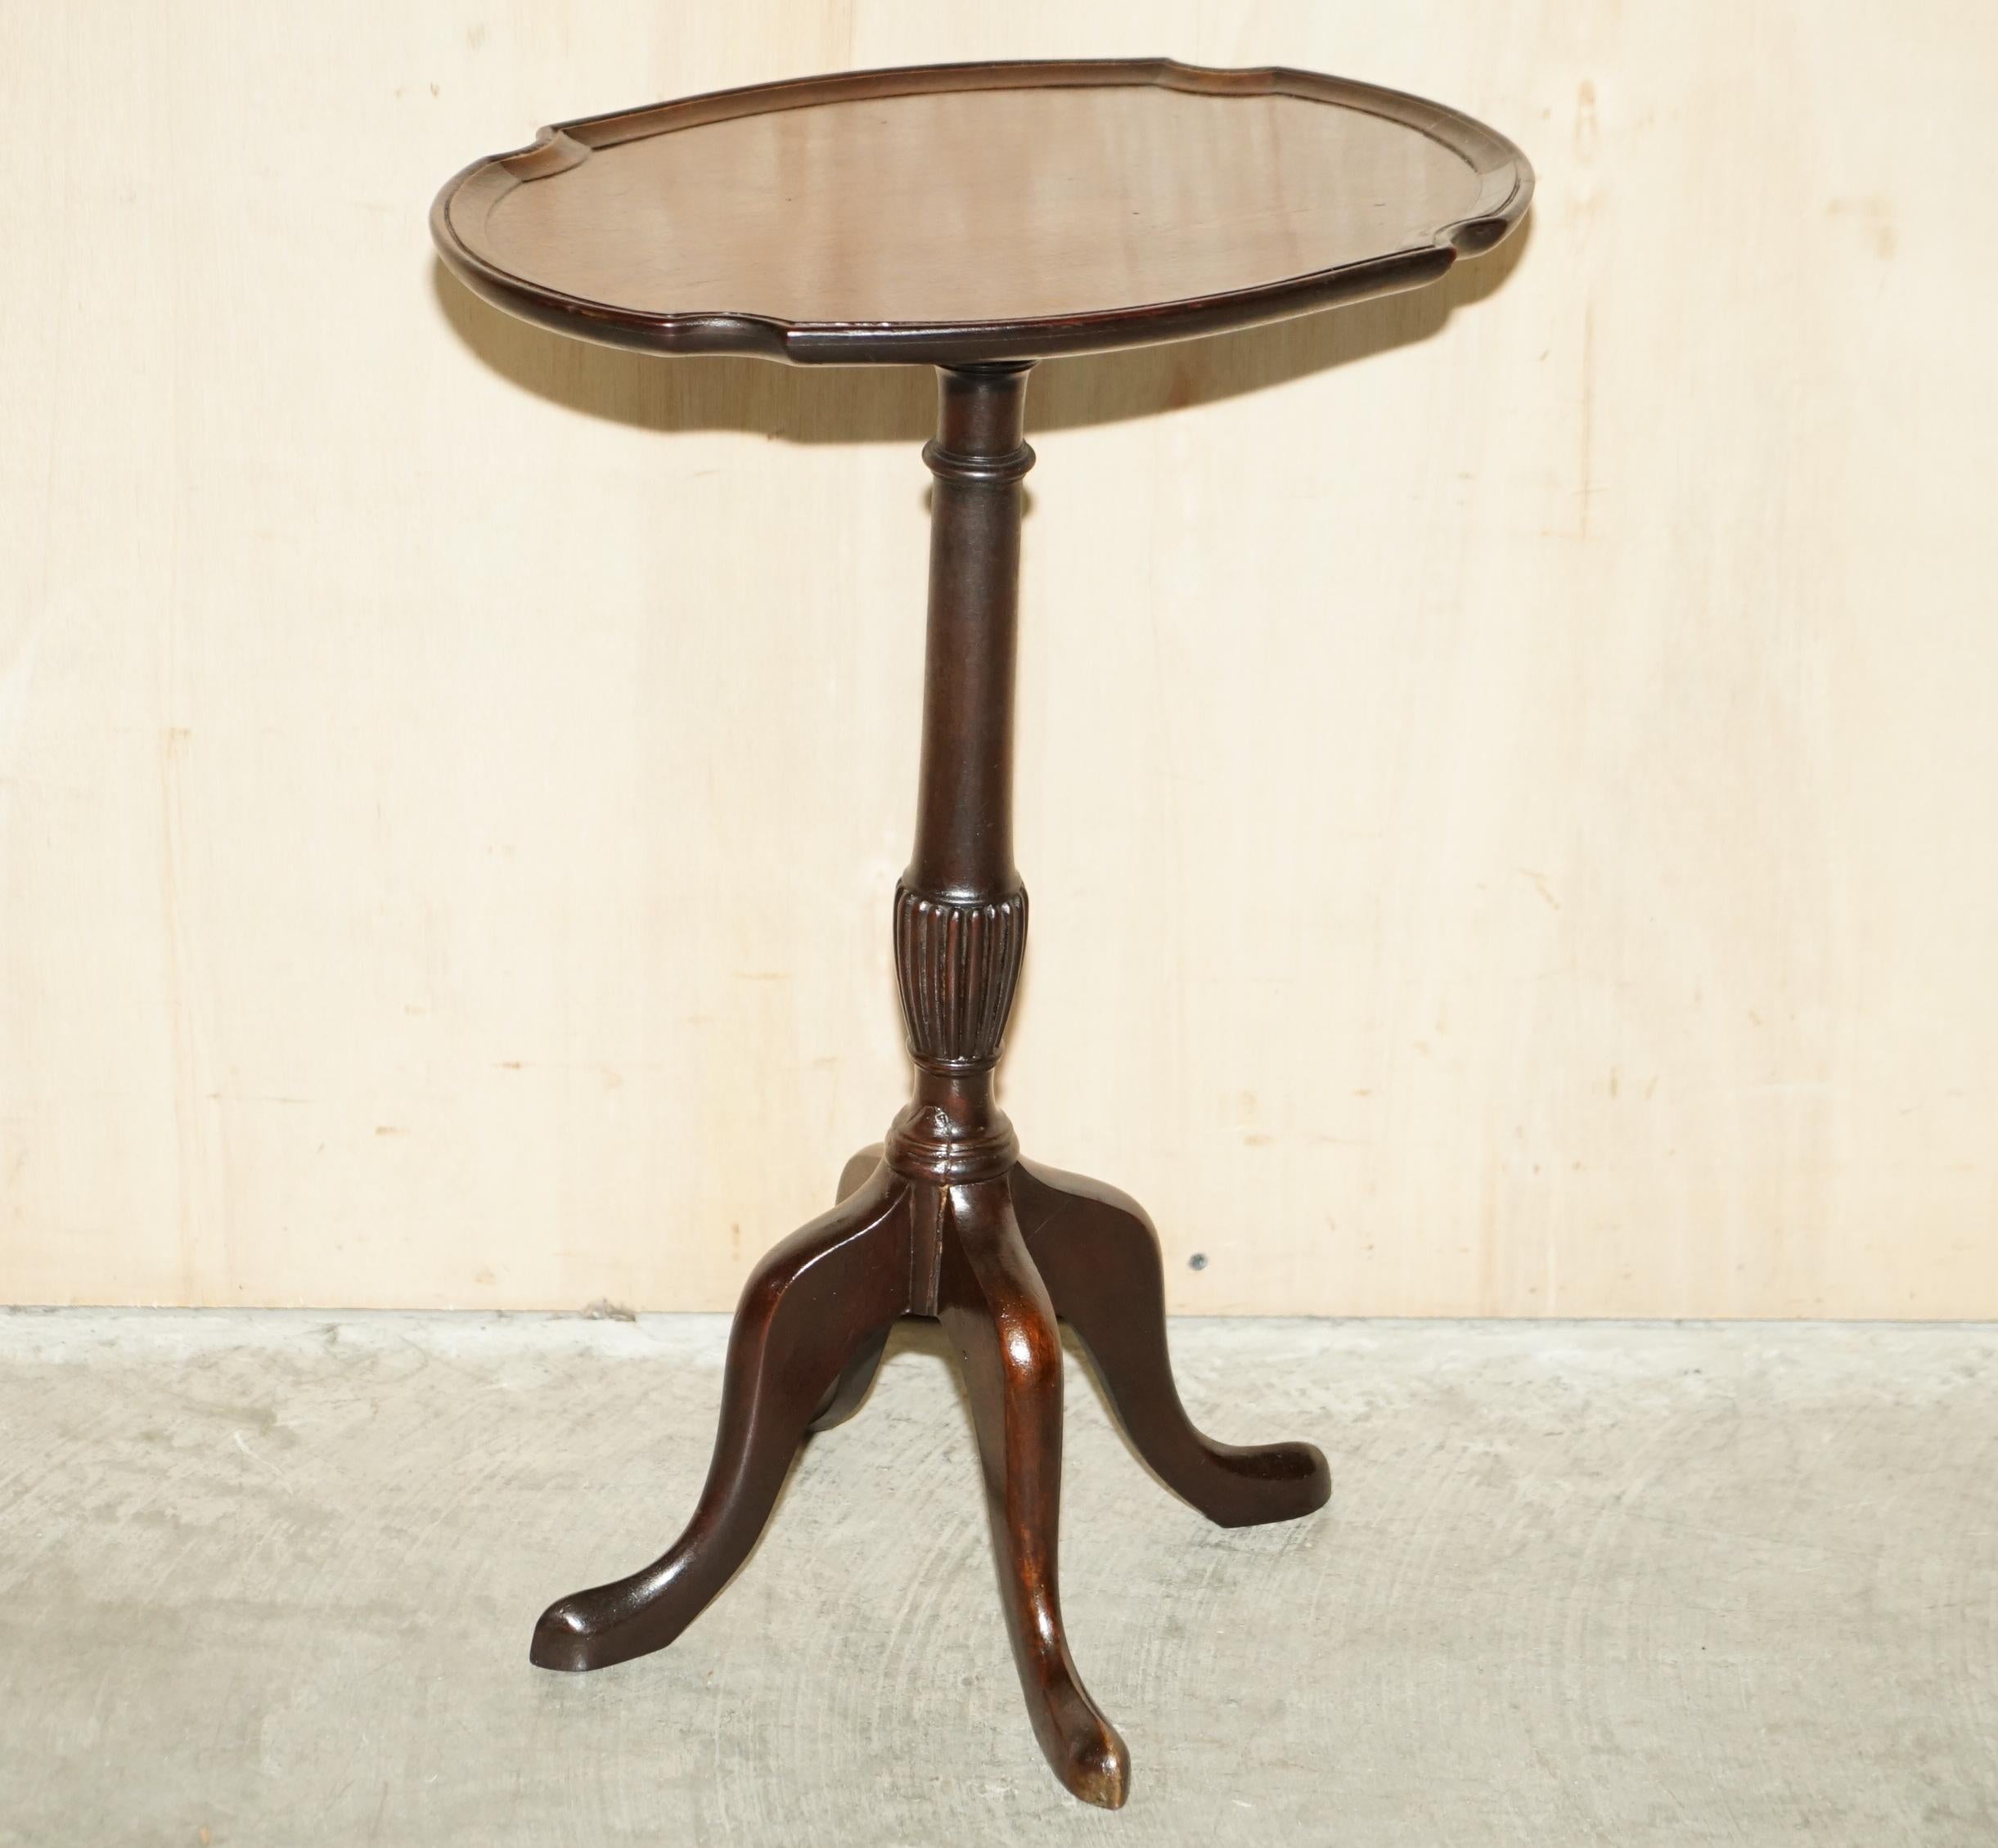 Royal House Antiques

Royal House Antiques is delighted to offer for sale this lovely vintage light Mahogany Pie crust edge, Oval lamp or side table.

A good-looking well-made four legged side table in good order, we have cleaned waxed and polished